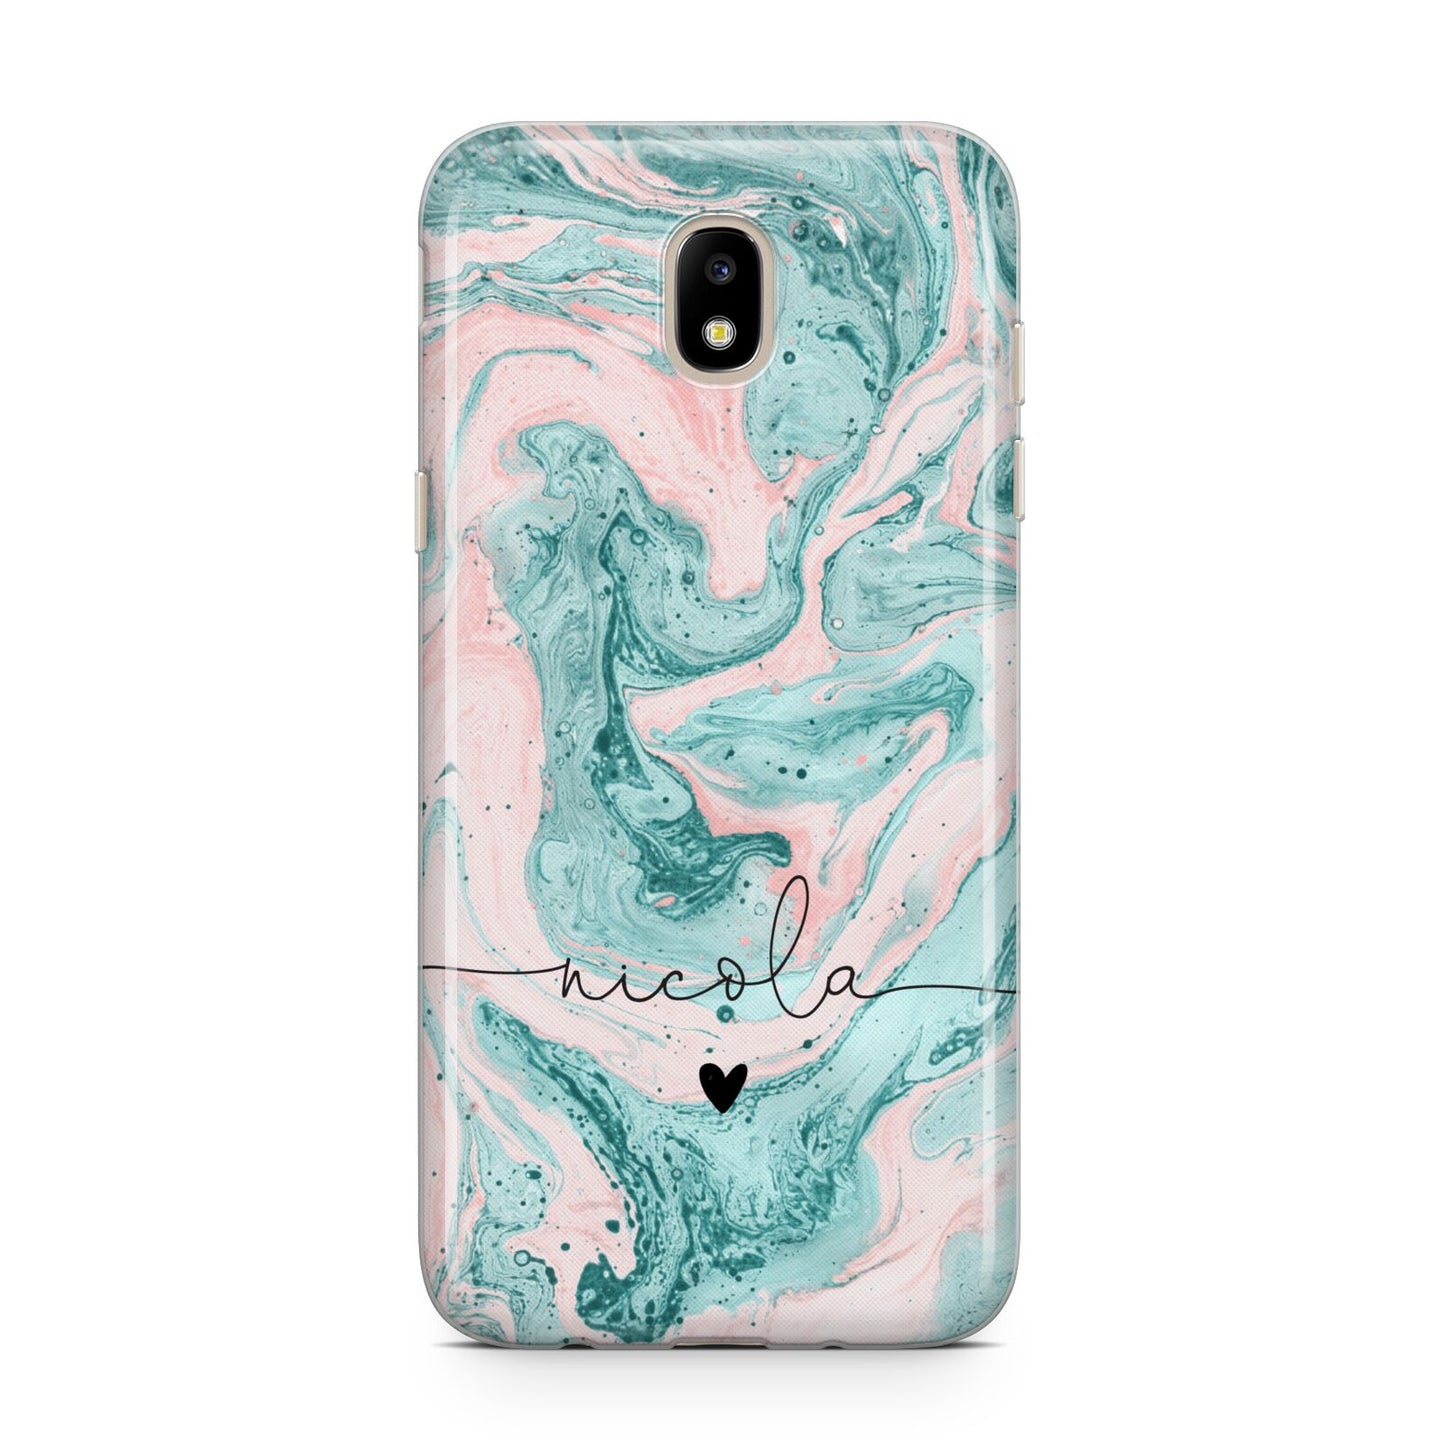 Personalised Name Green Swirl Marble Samsung J5 2017 Case